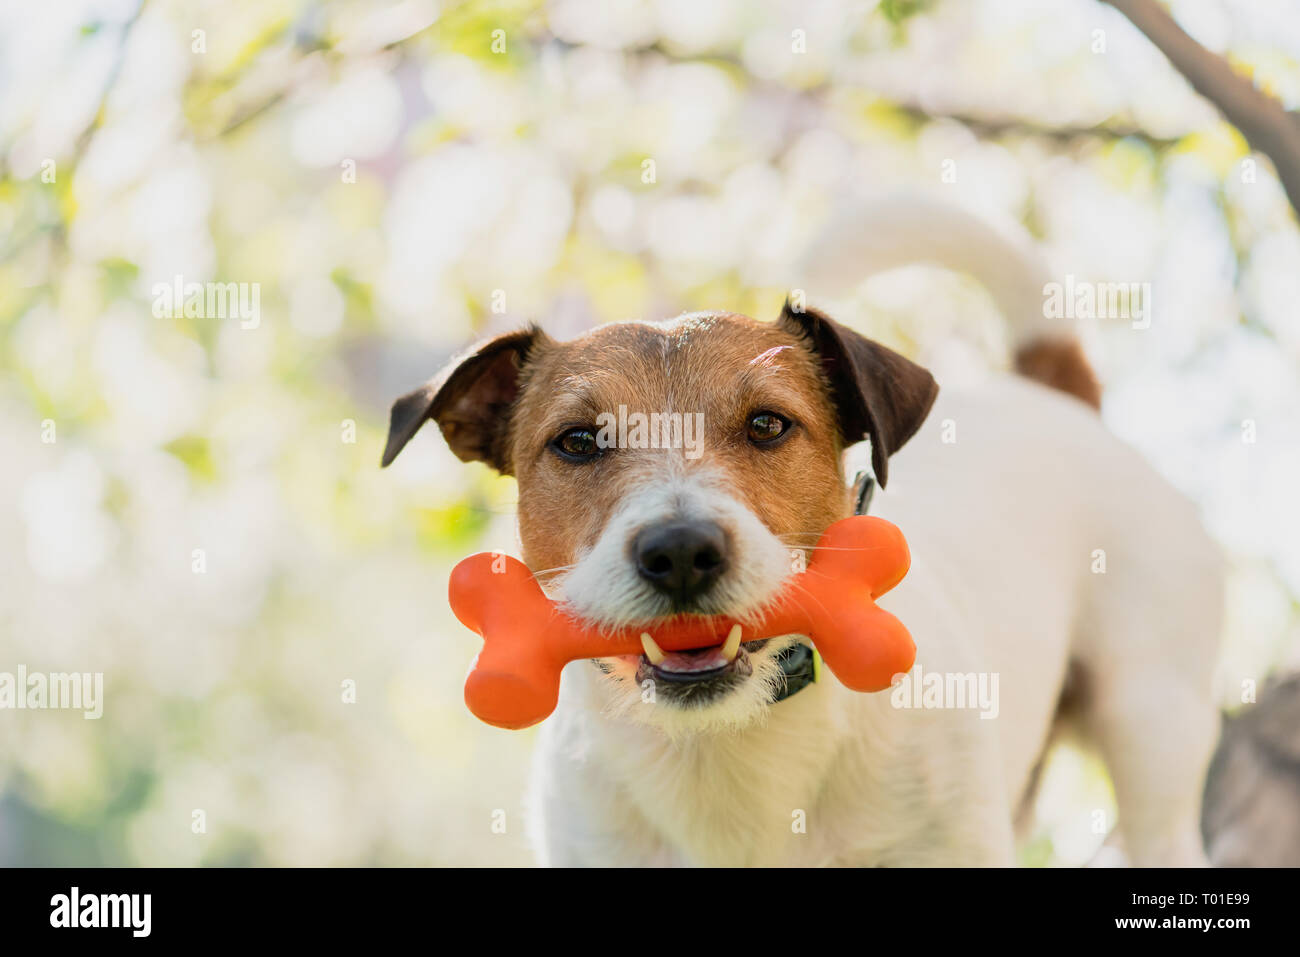 Dog holding toy bone in mouth under branch of blossoming apple tree Stock Photo